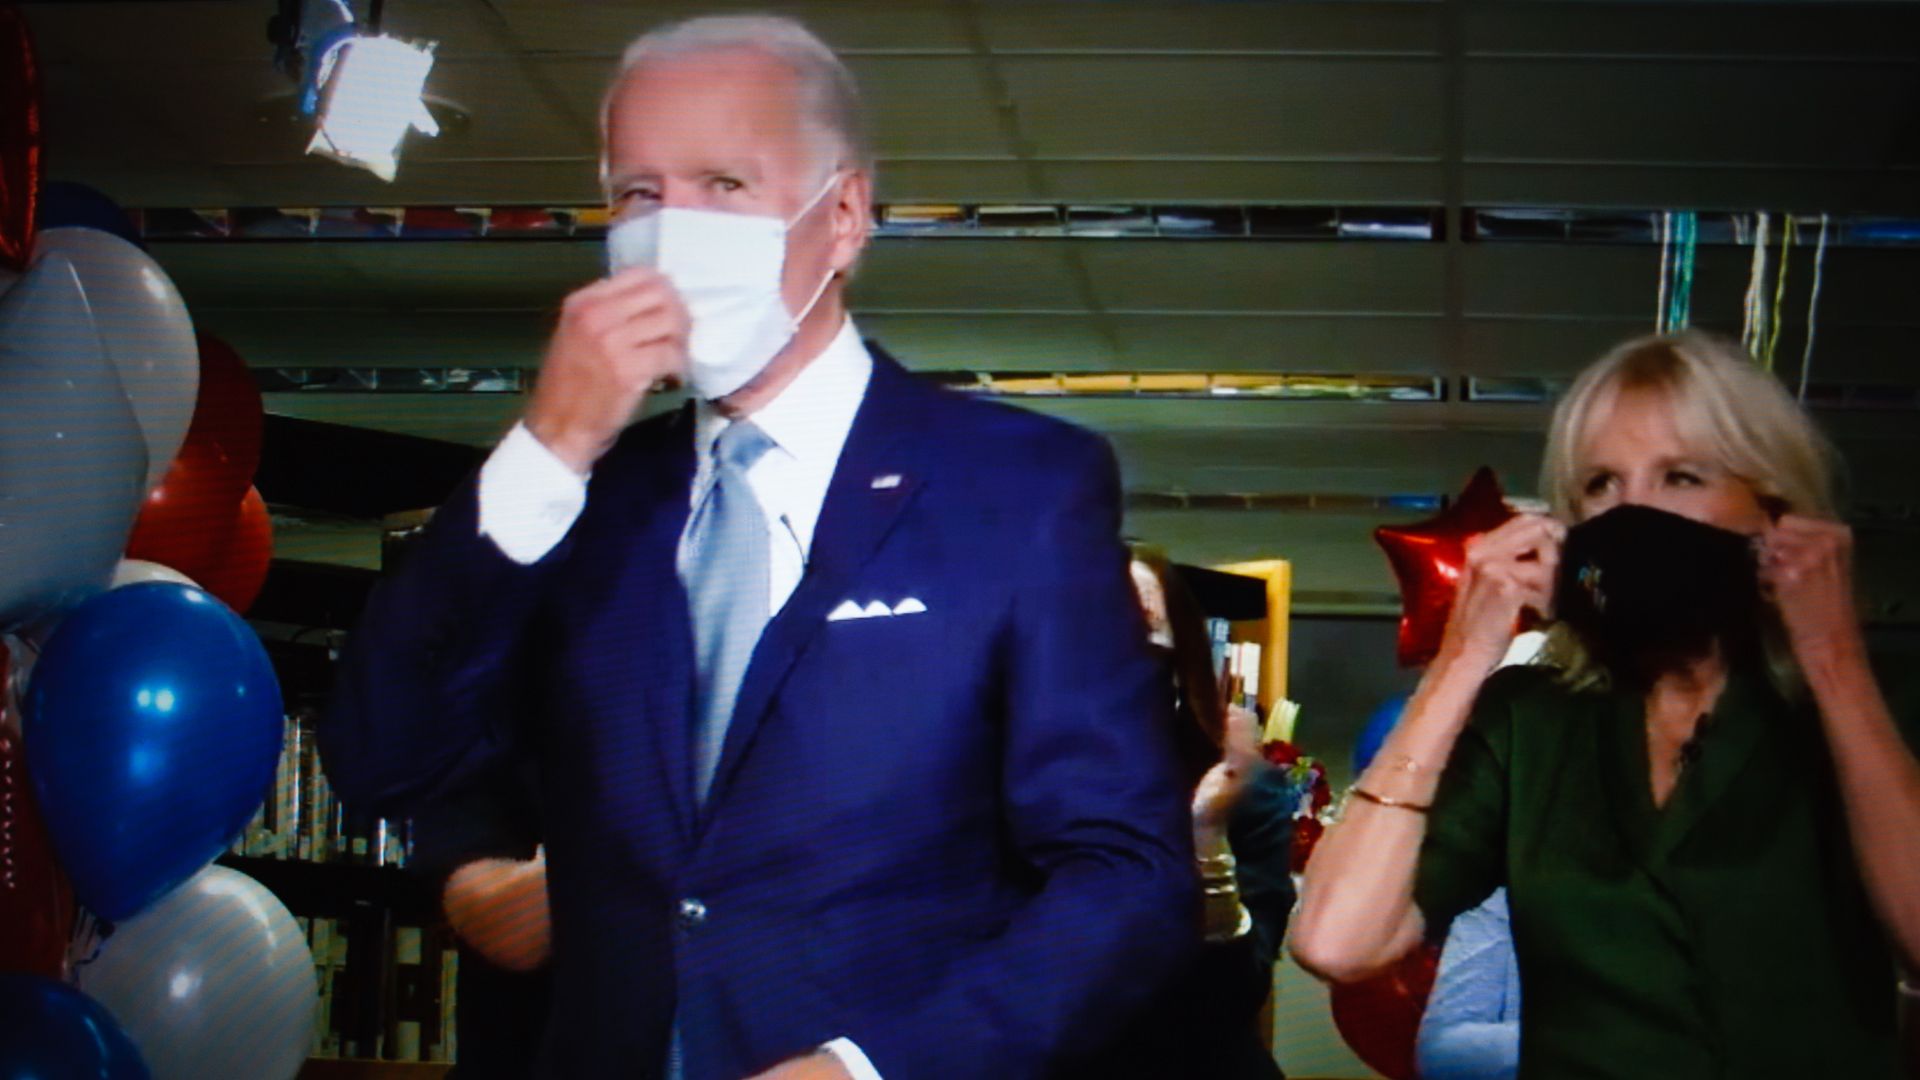 Biden and his wife walk through a hall while masking up at the Democratic National Convention.